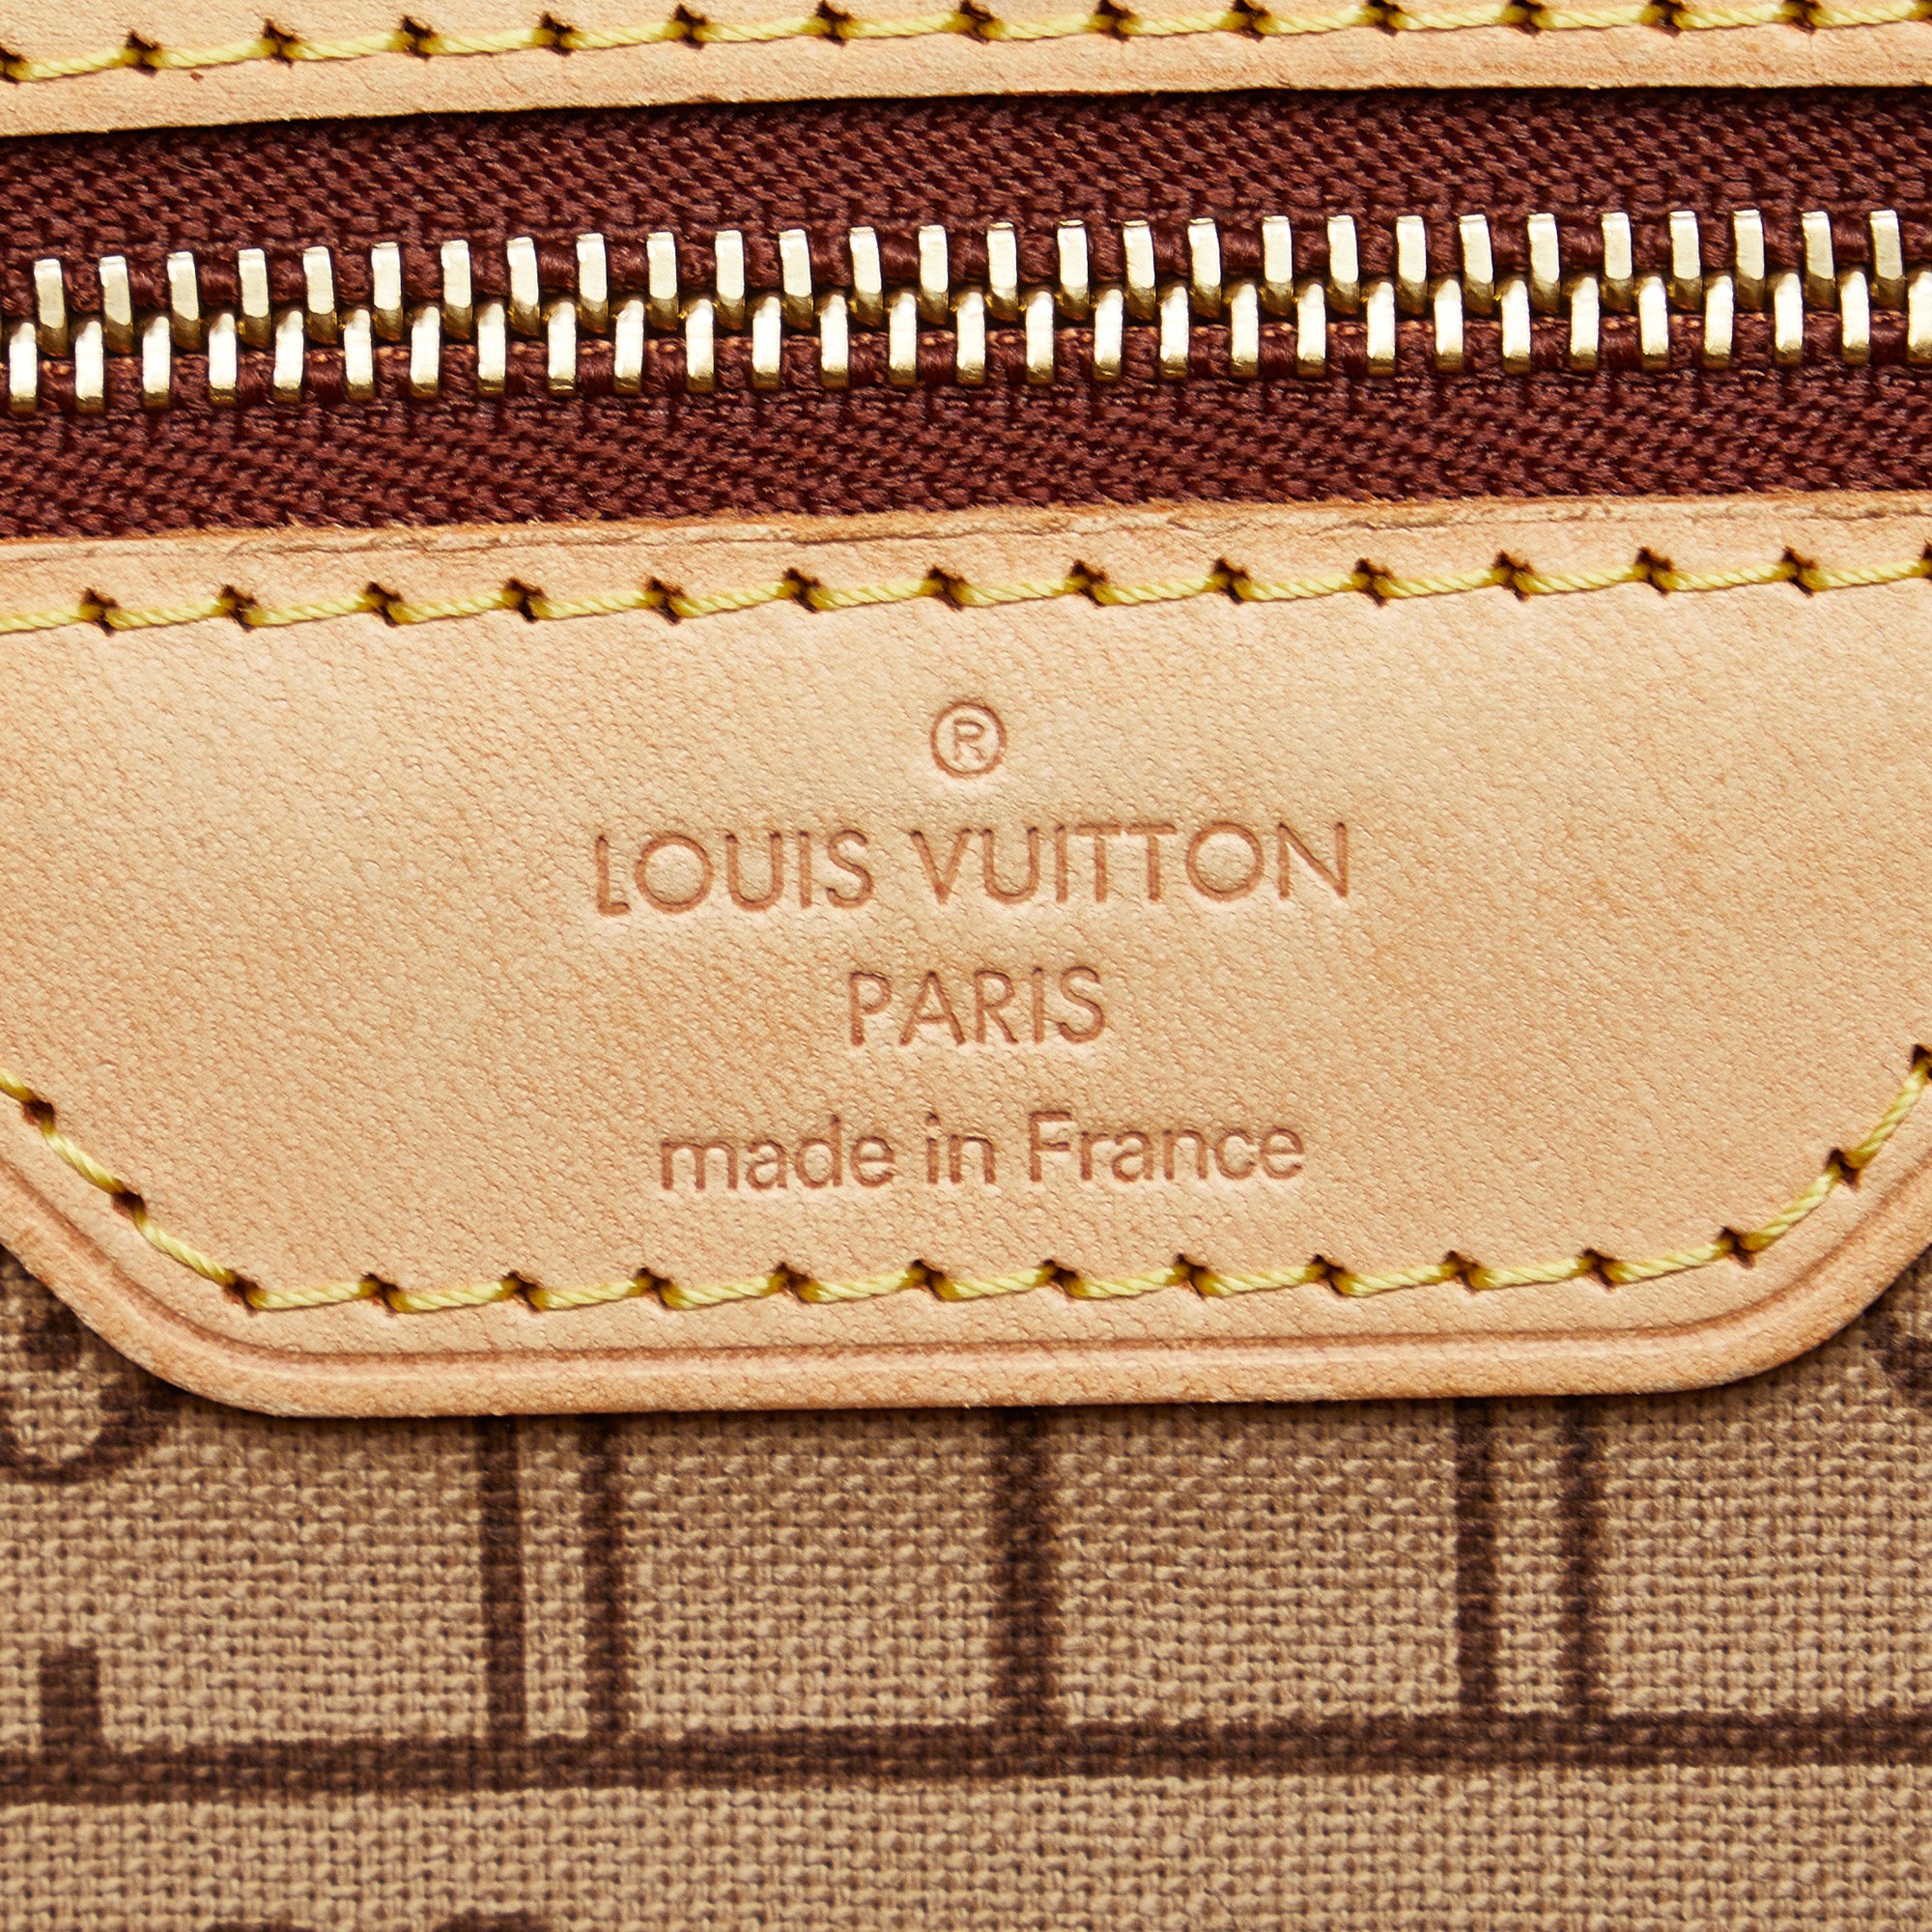 Louis Vuitton Neverfull PM Authentic Small Tote Brown - $440 - From Lucie